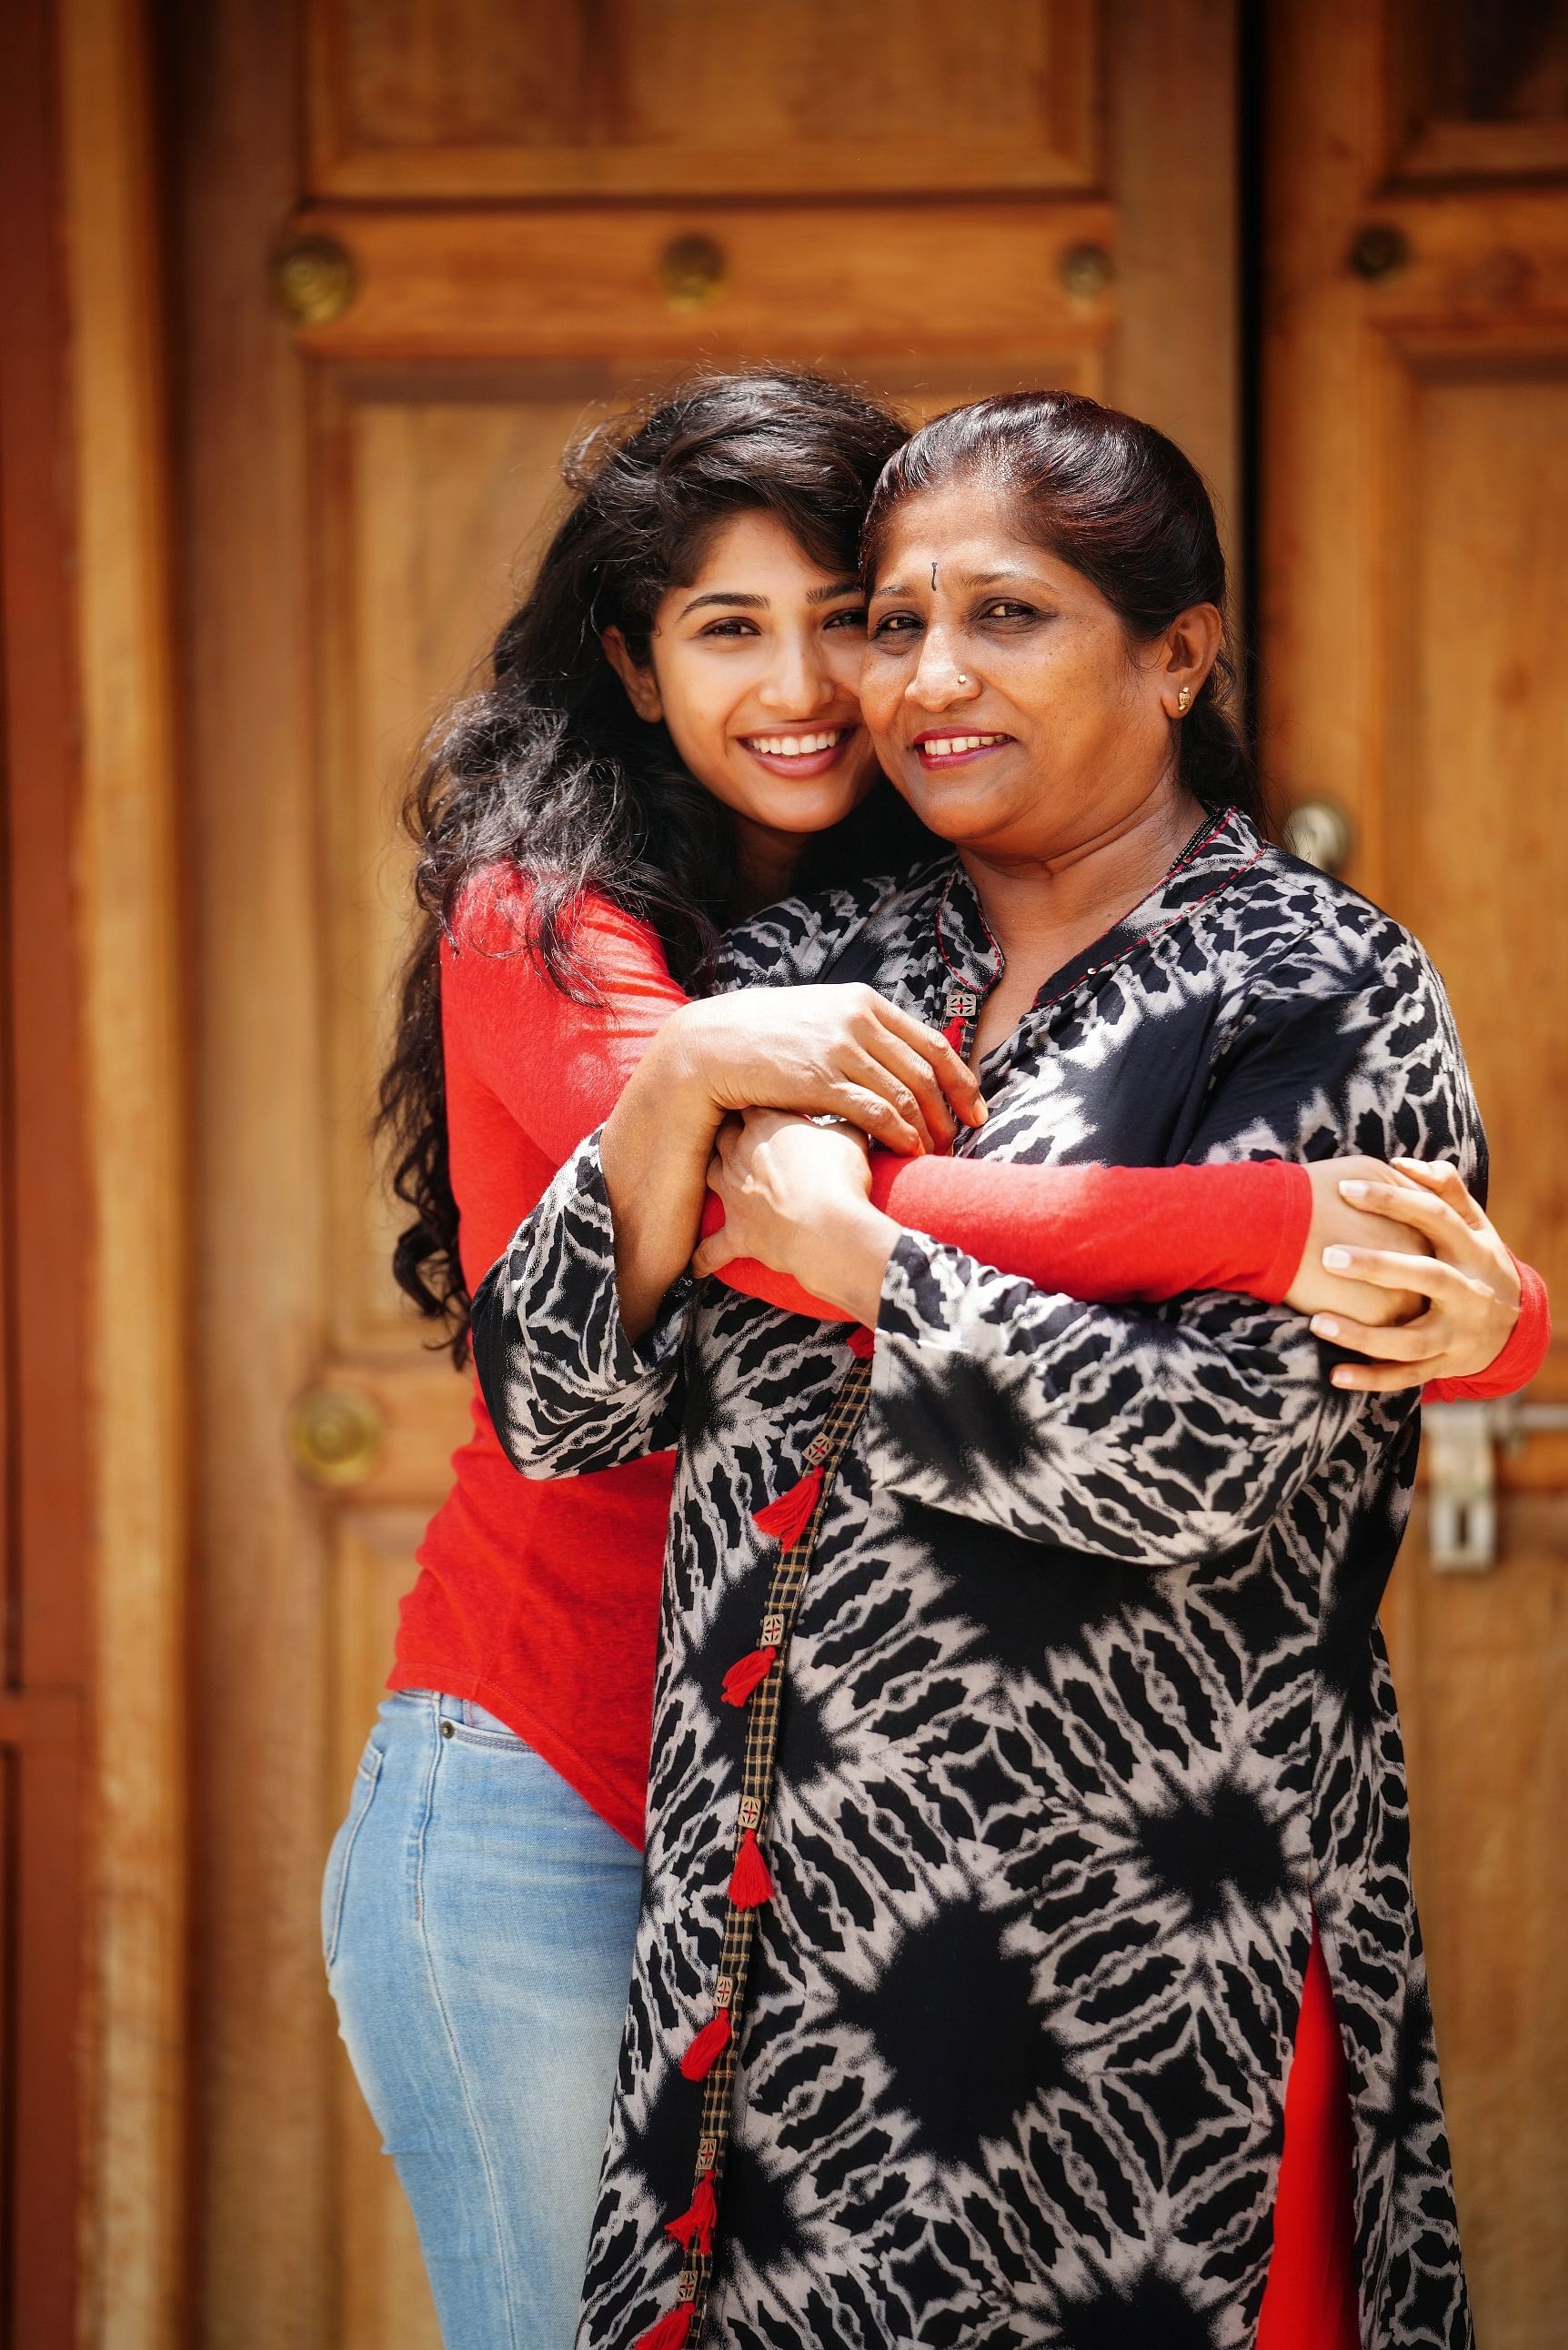 Roshni and her mother Jyothi.